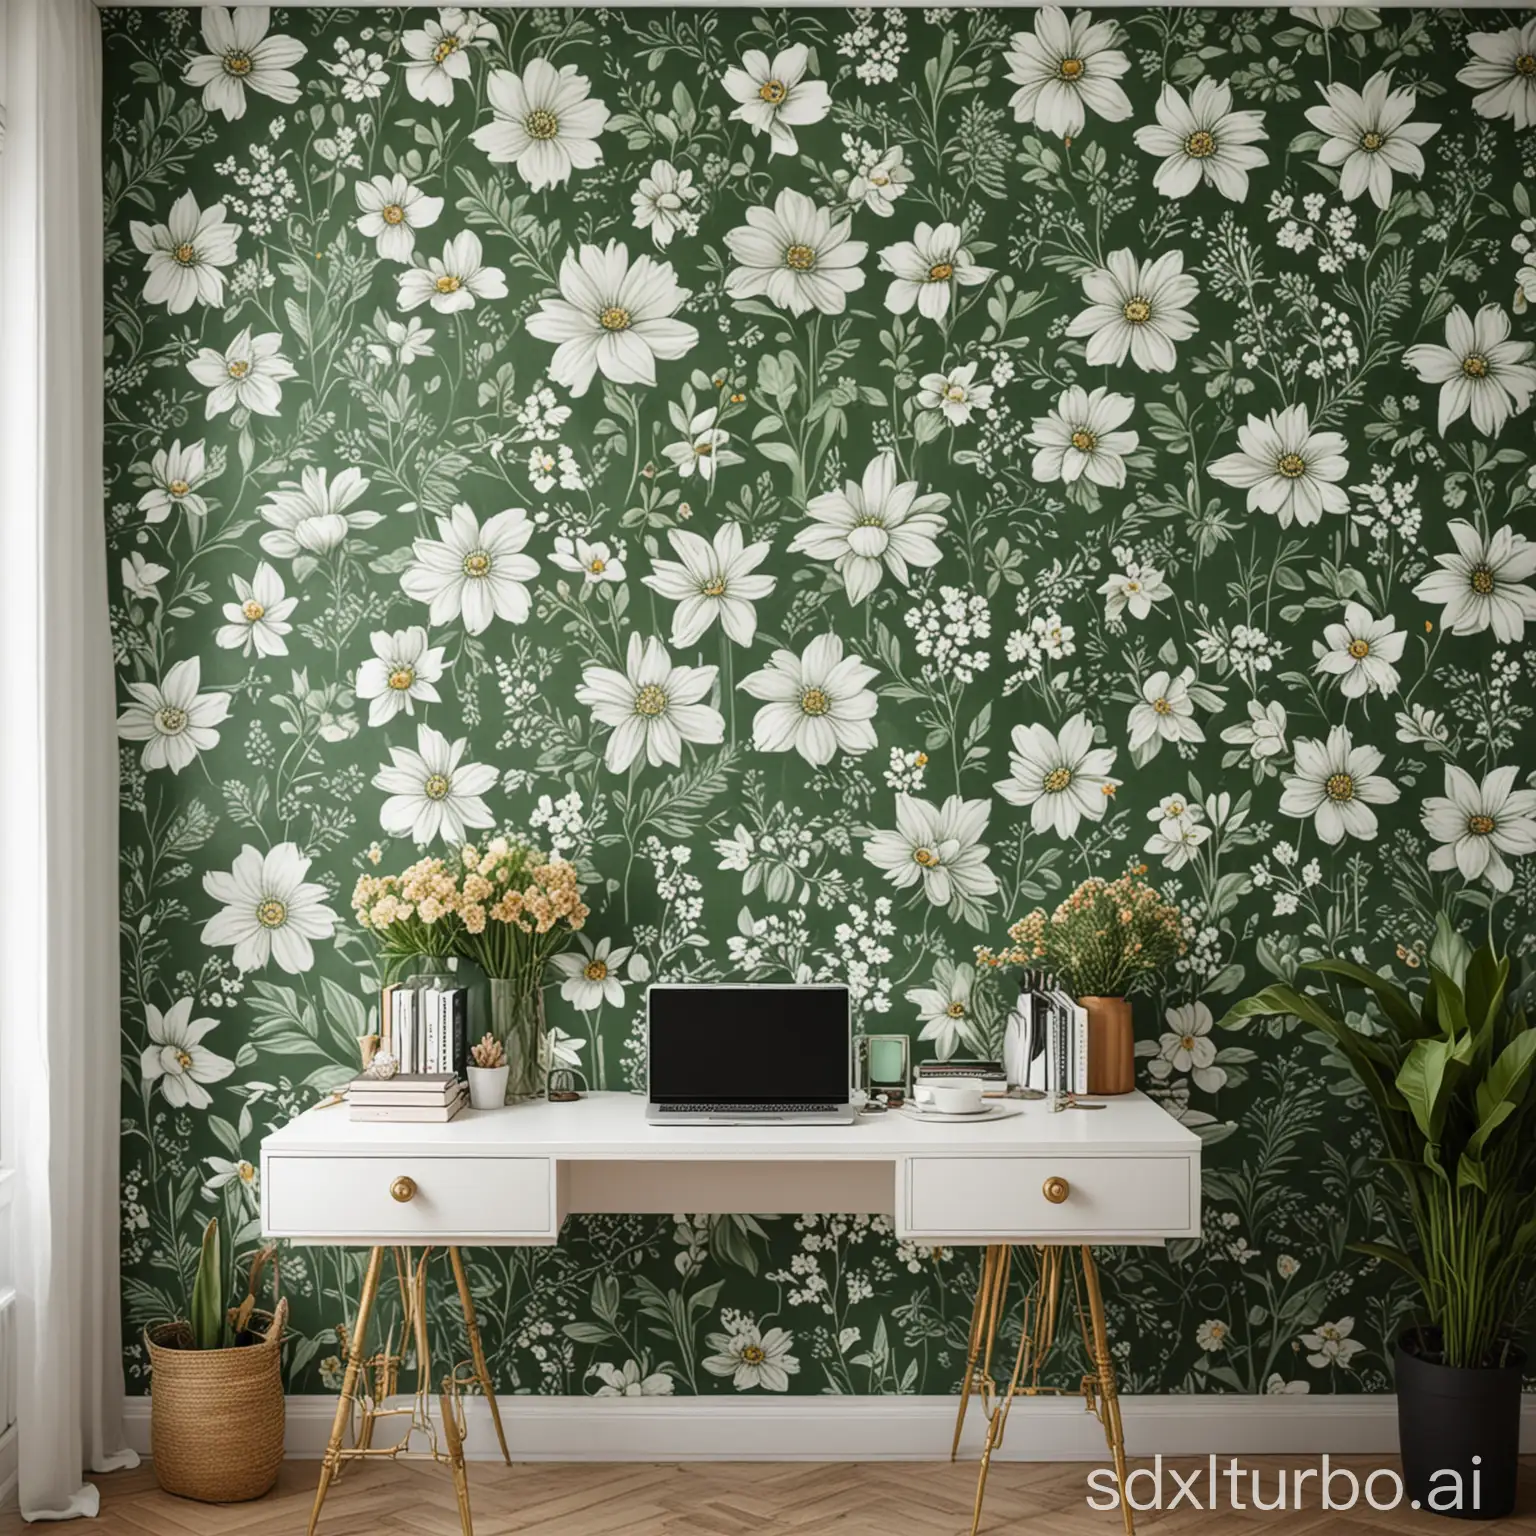 a wall with green and white color stylish patterns, beautiful painting on wall, desk on front of wall with flowers and a decorative item over it